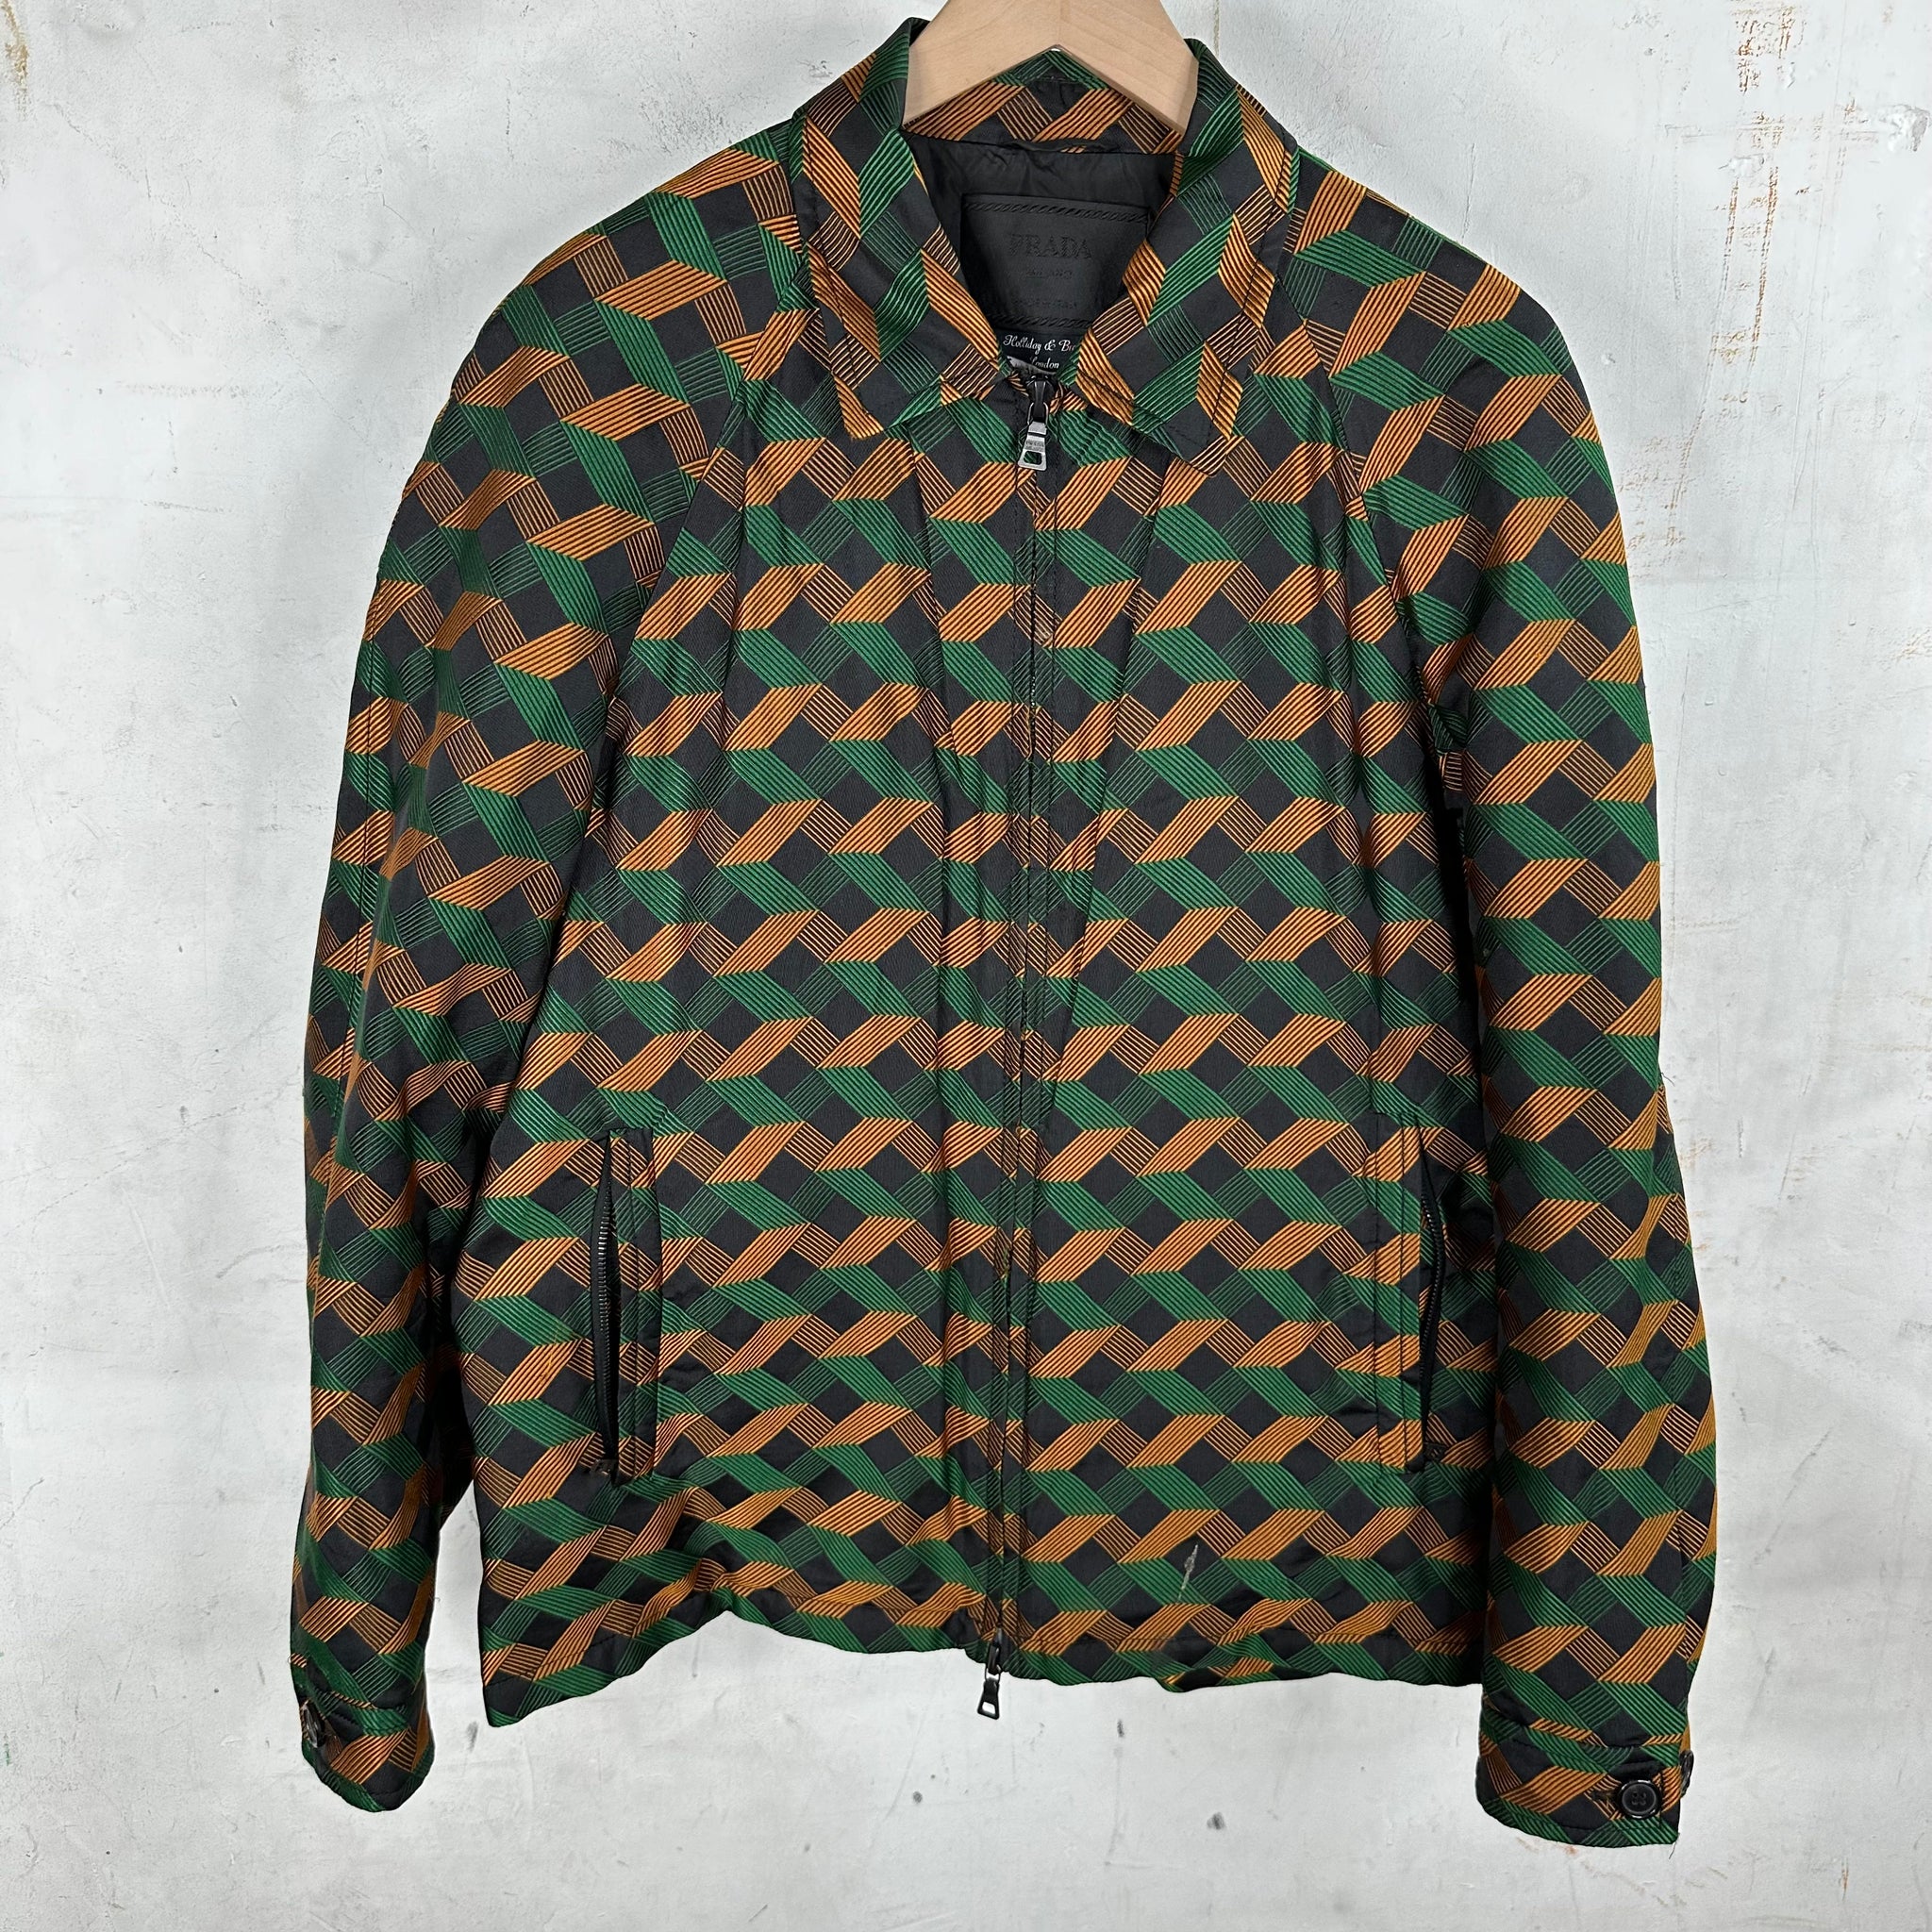 Prada Holliday & Brown Patterned Insulated Jacket